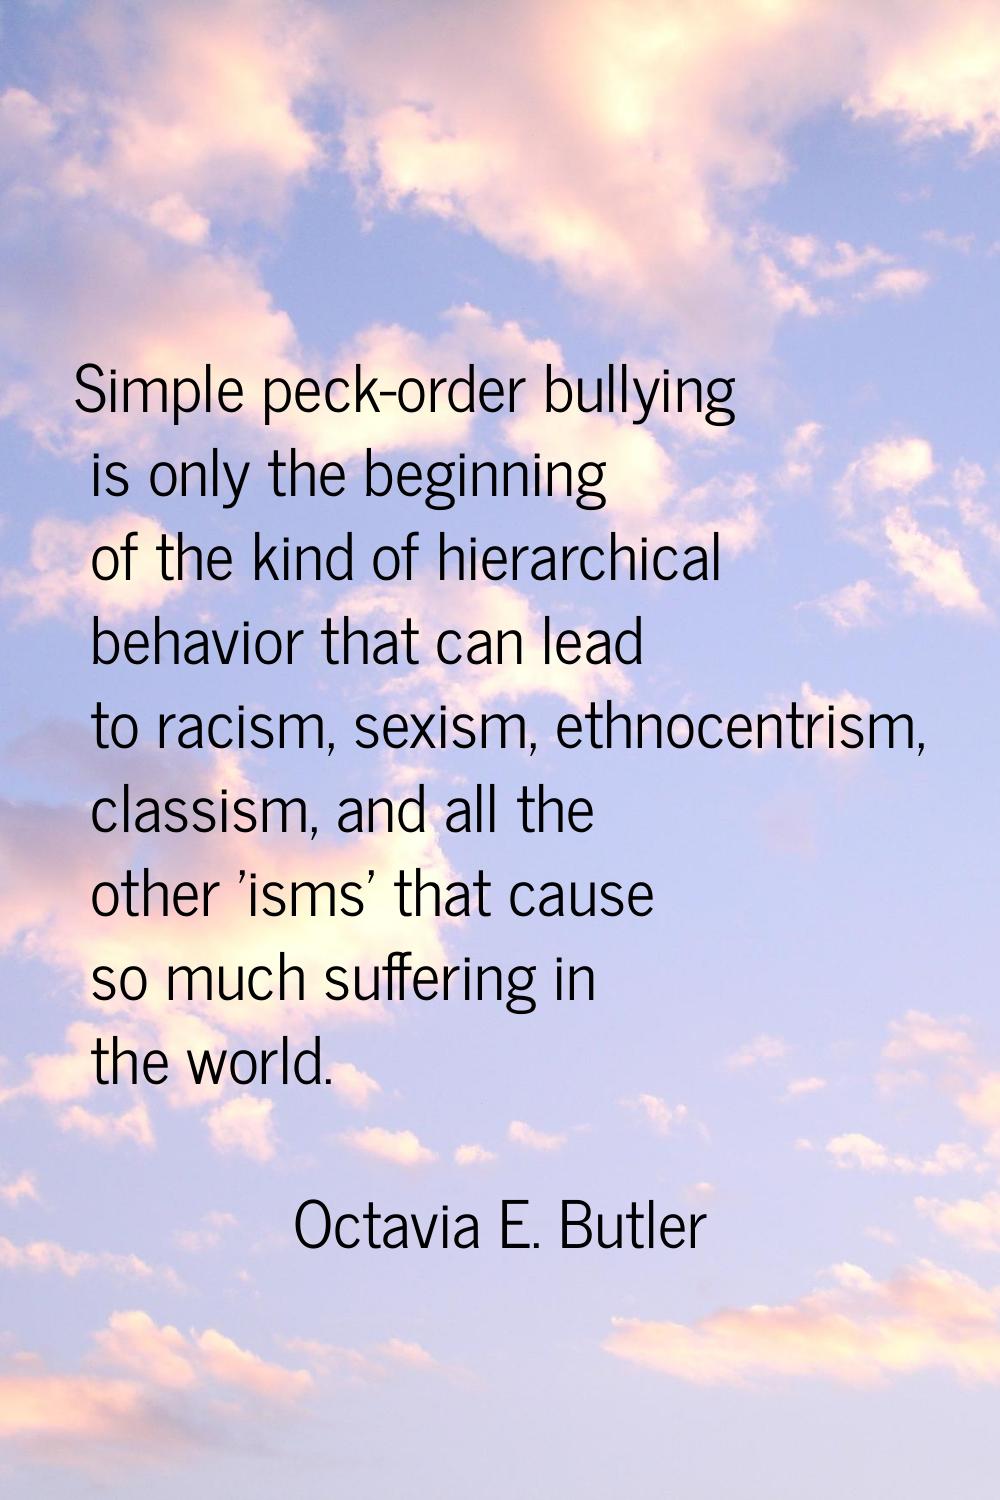 Simple peck-order bullying is only the beginning of the kind of hierarchical behavior that can lead